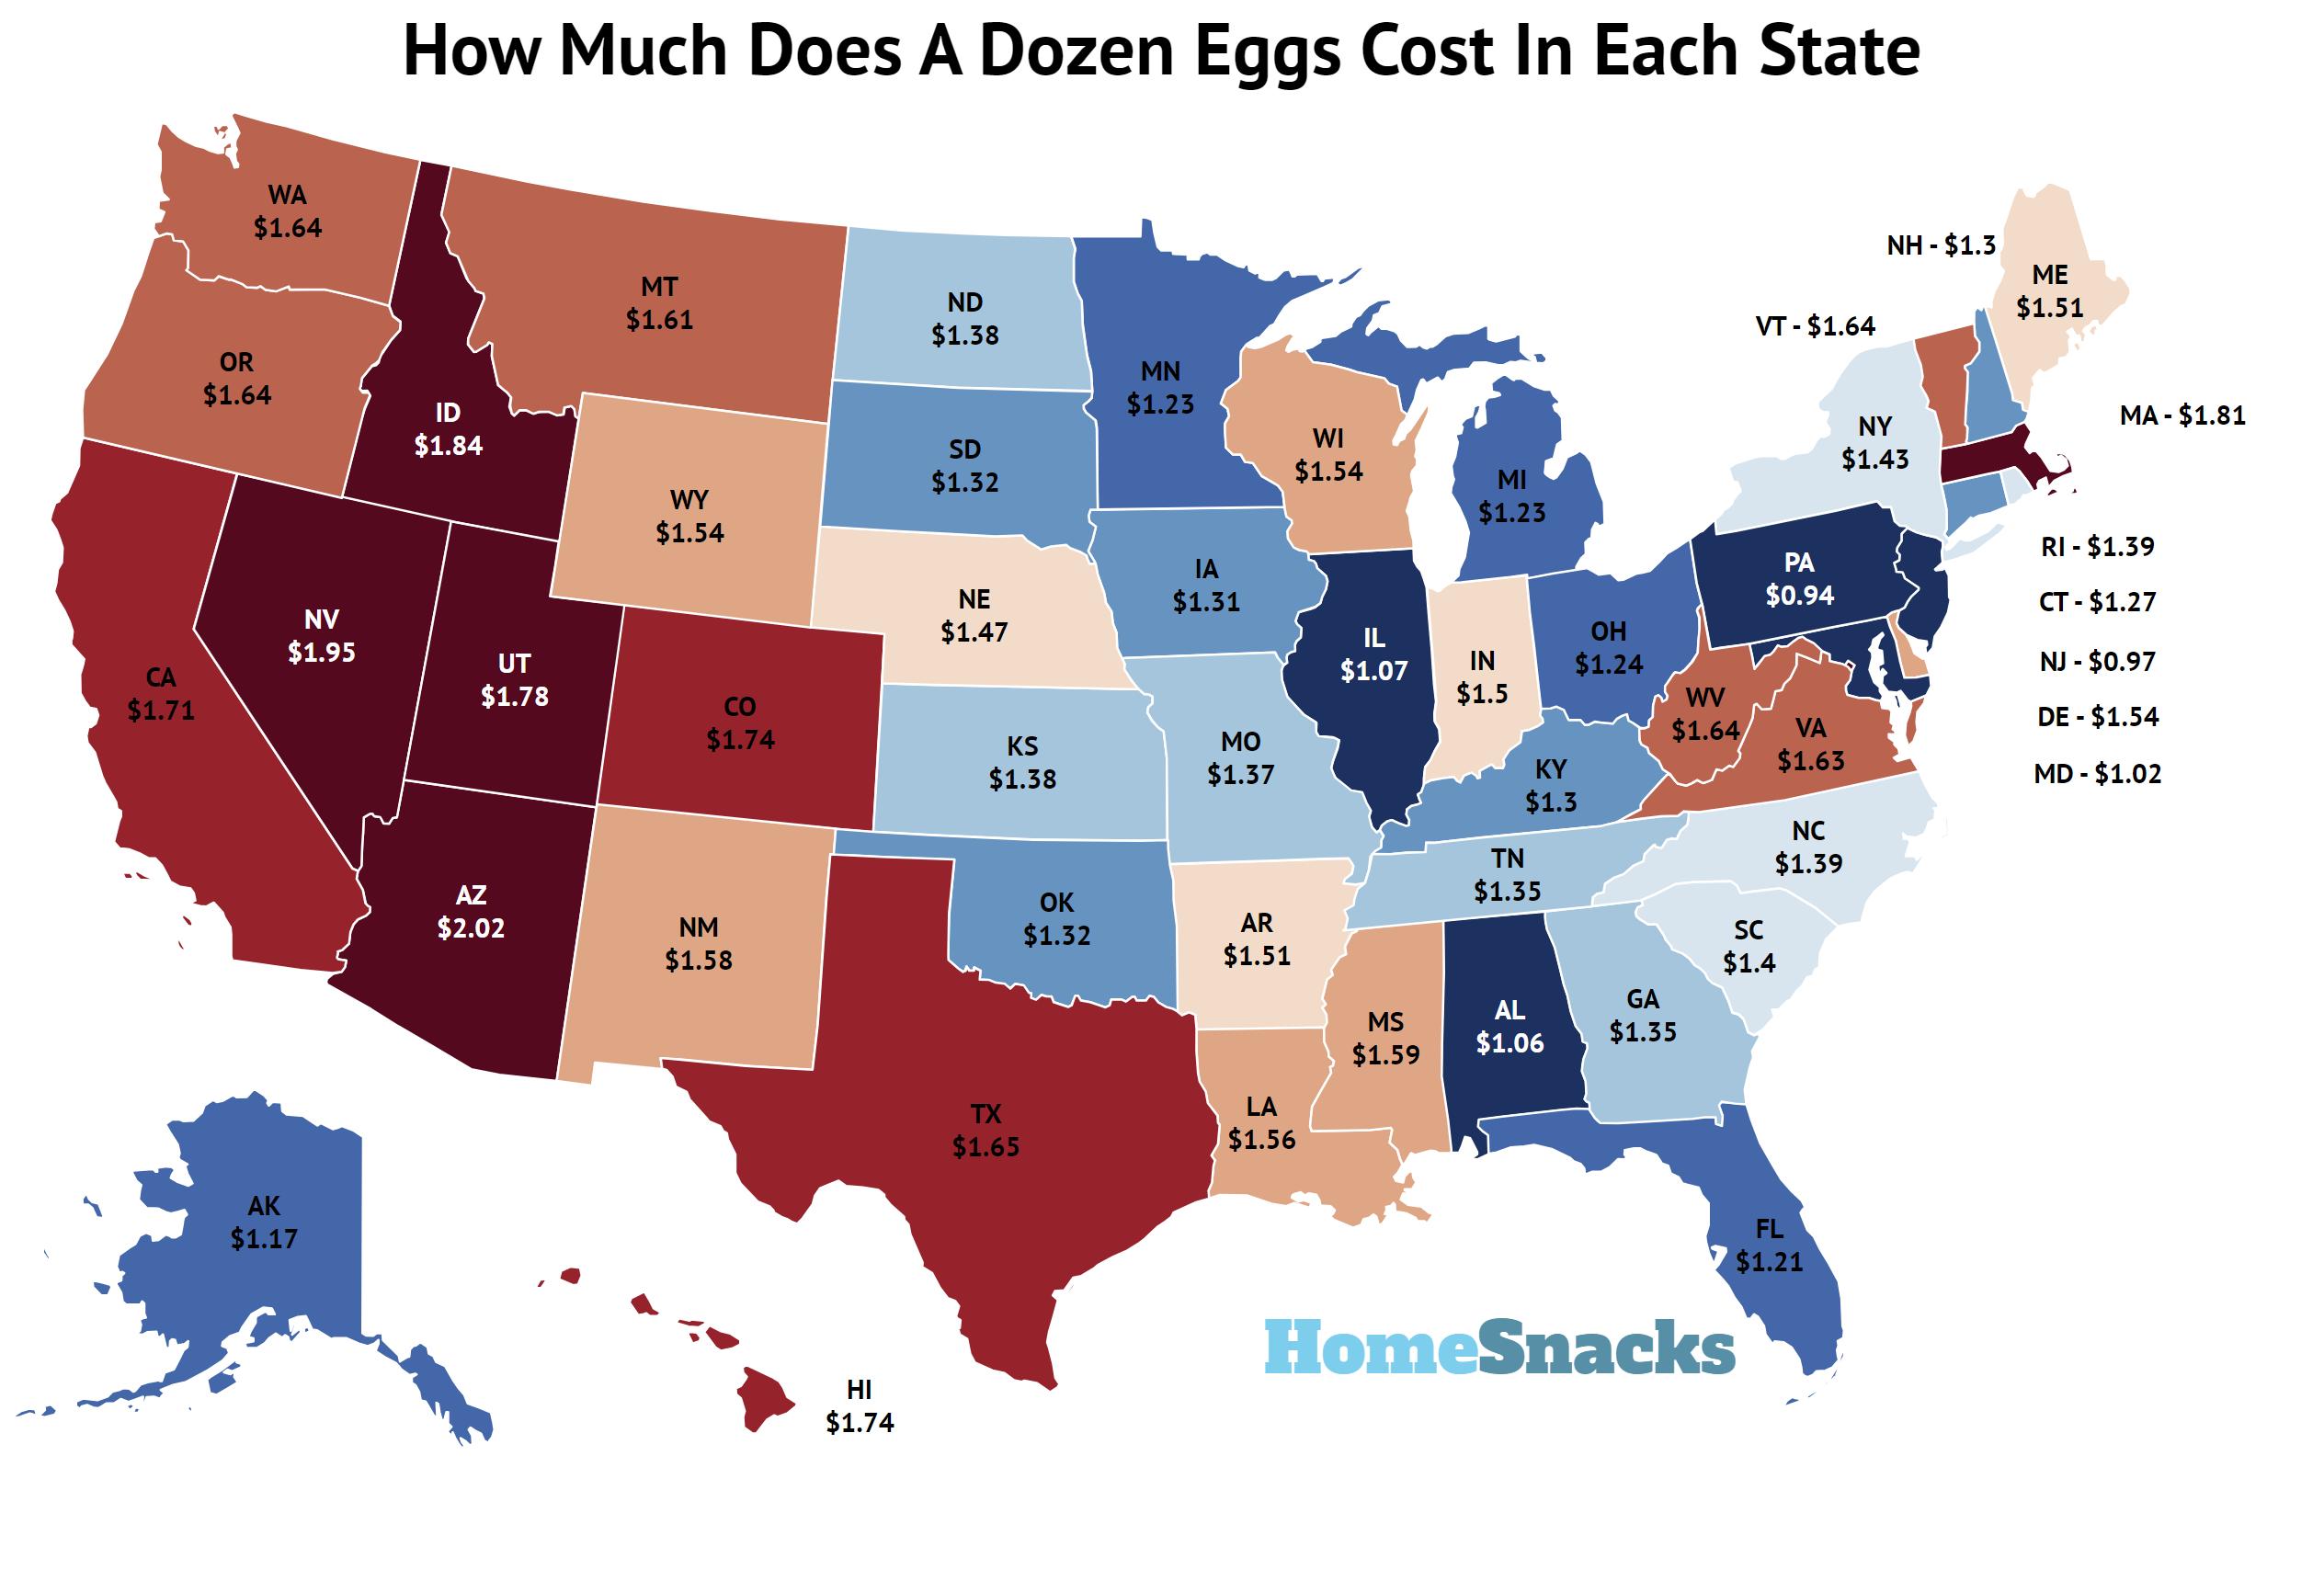 How Much Does A Dozen Eggs Cost In Each State